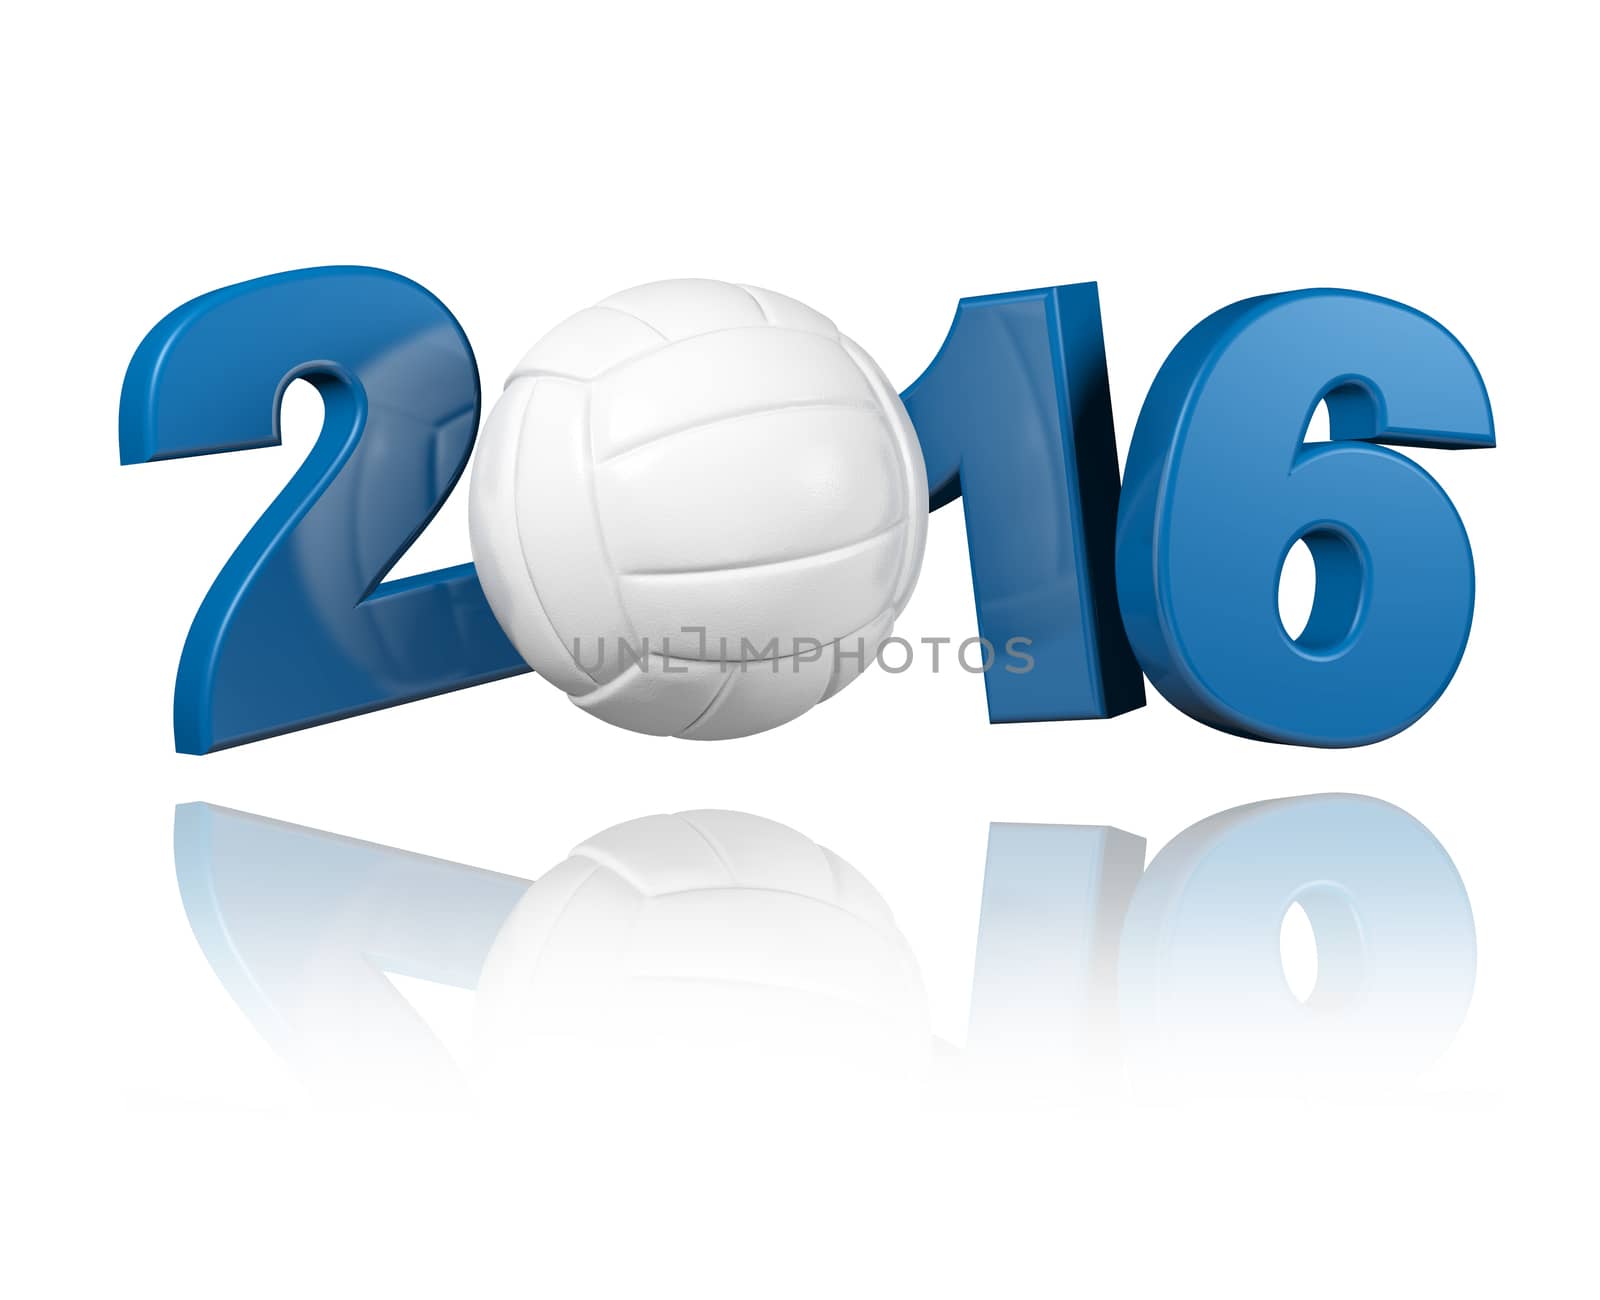 Volleyball 2016 design  by shkyo30